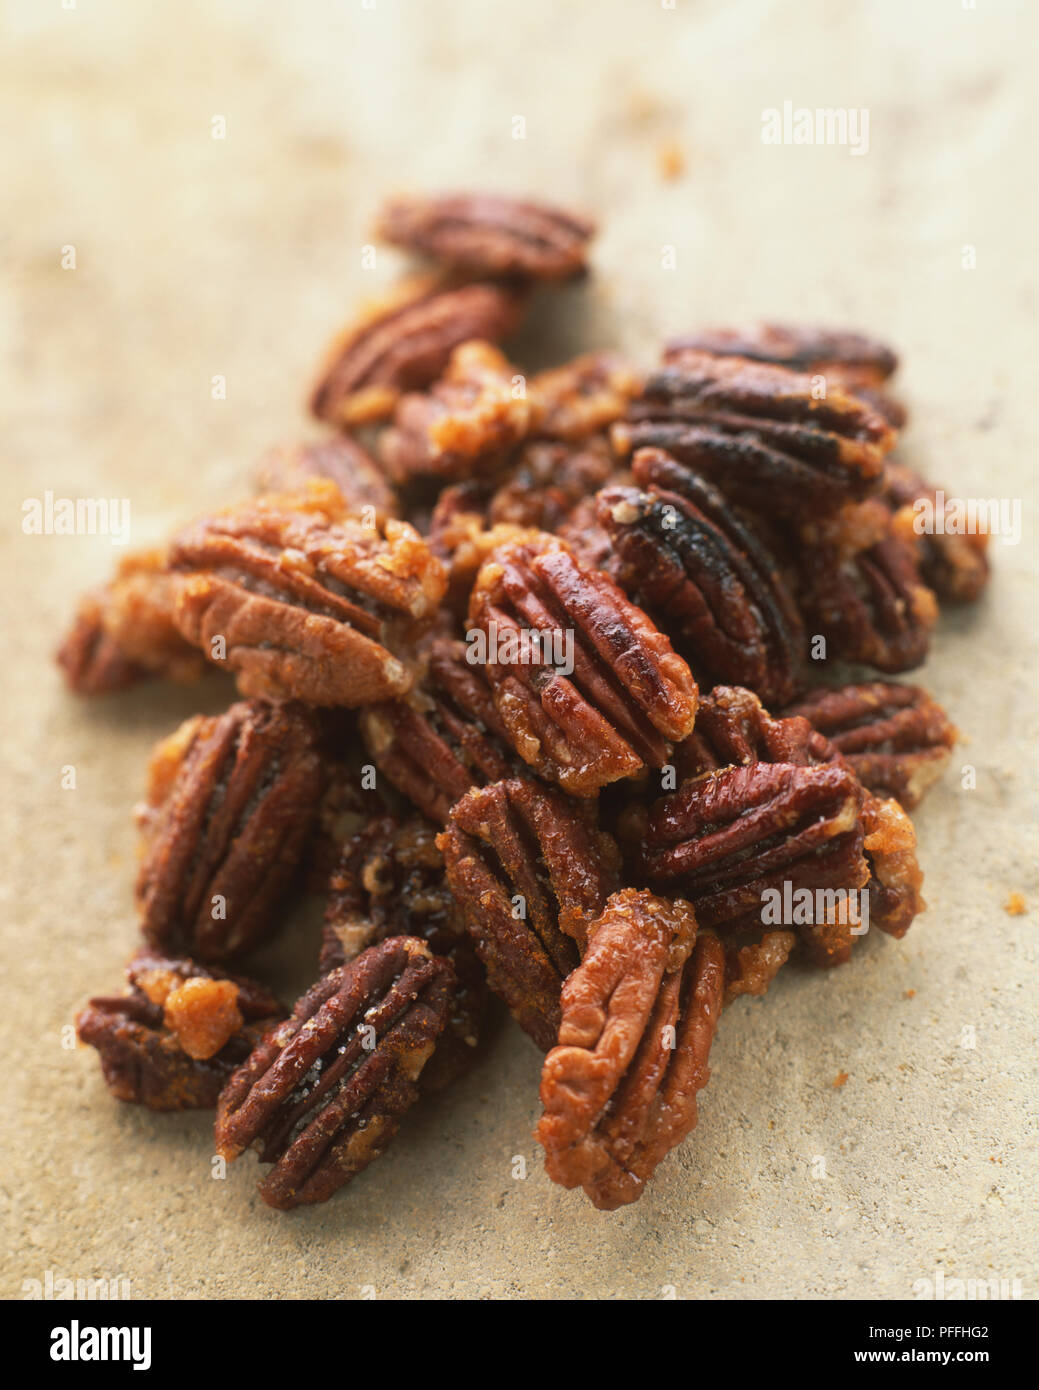 Crunchy sweet and spicy pecan nuts. Stock Photo